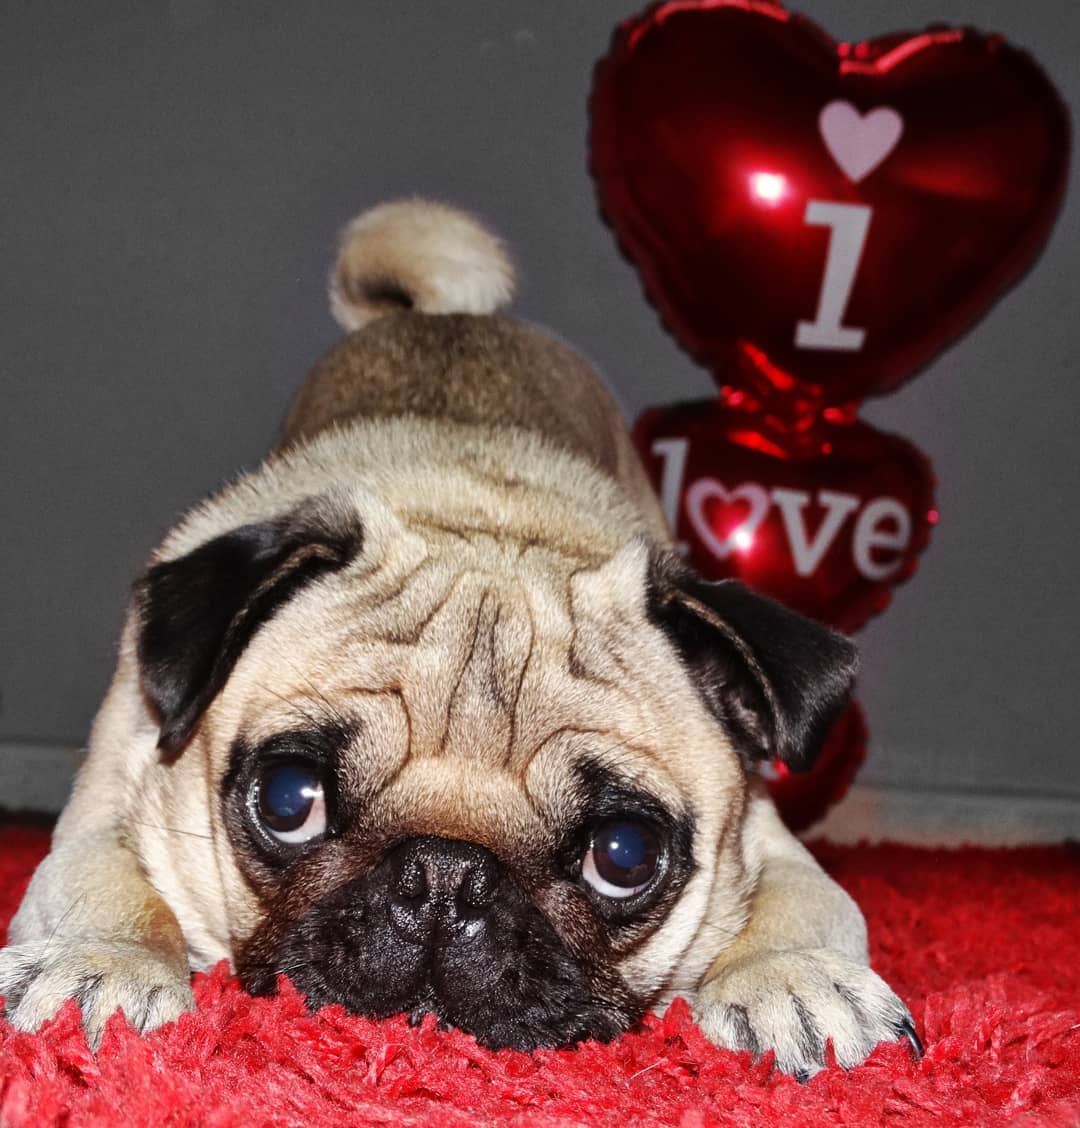 A Pug lying on the red carpet with valentine balloons behind him